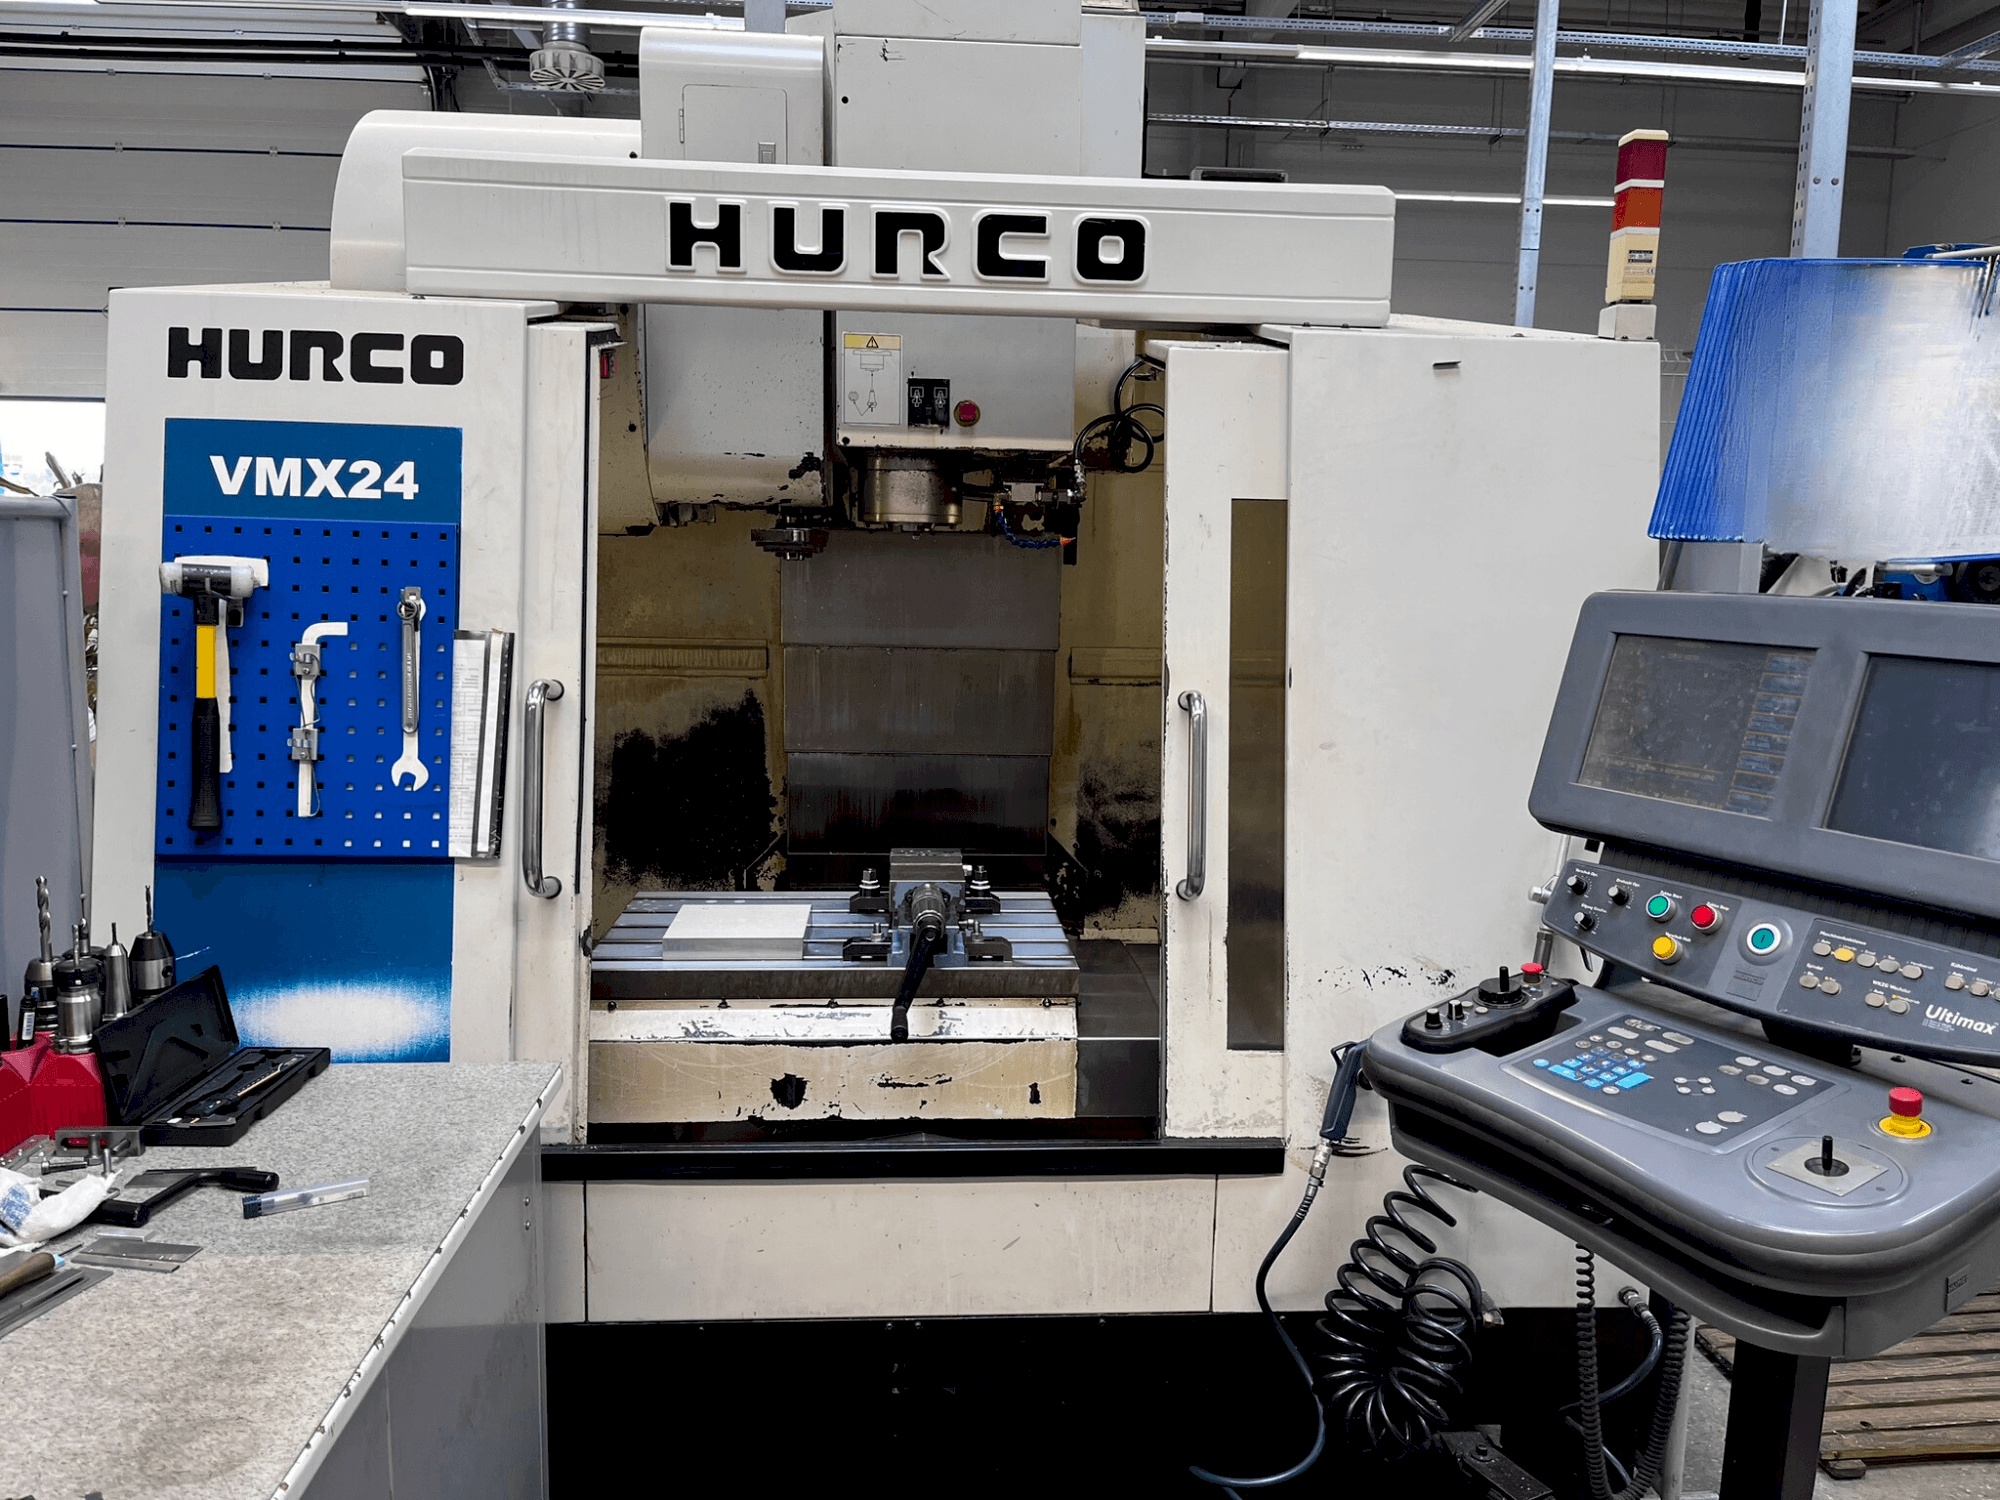 Front view of Hurco VMX 24  machine